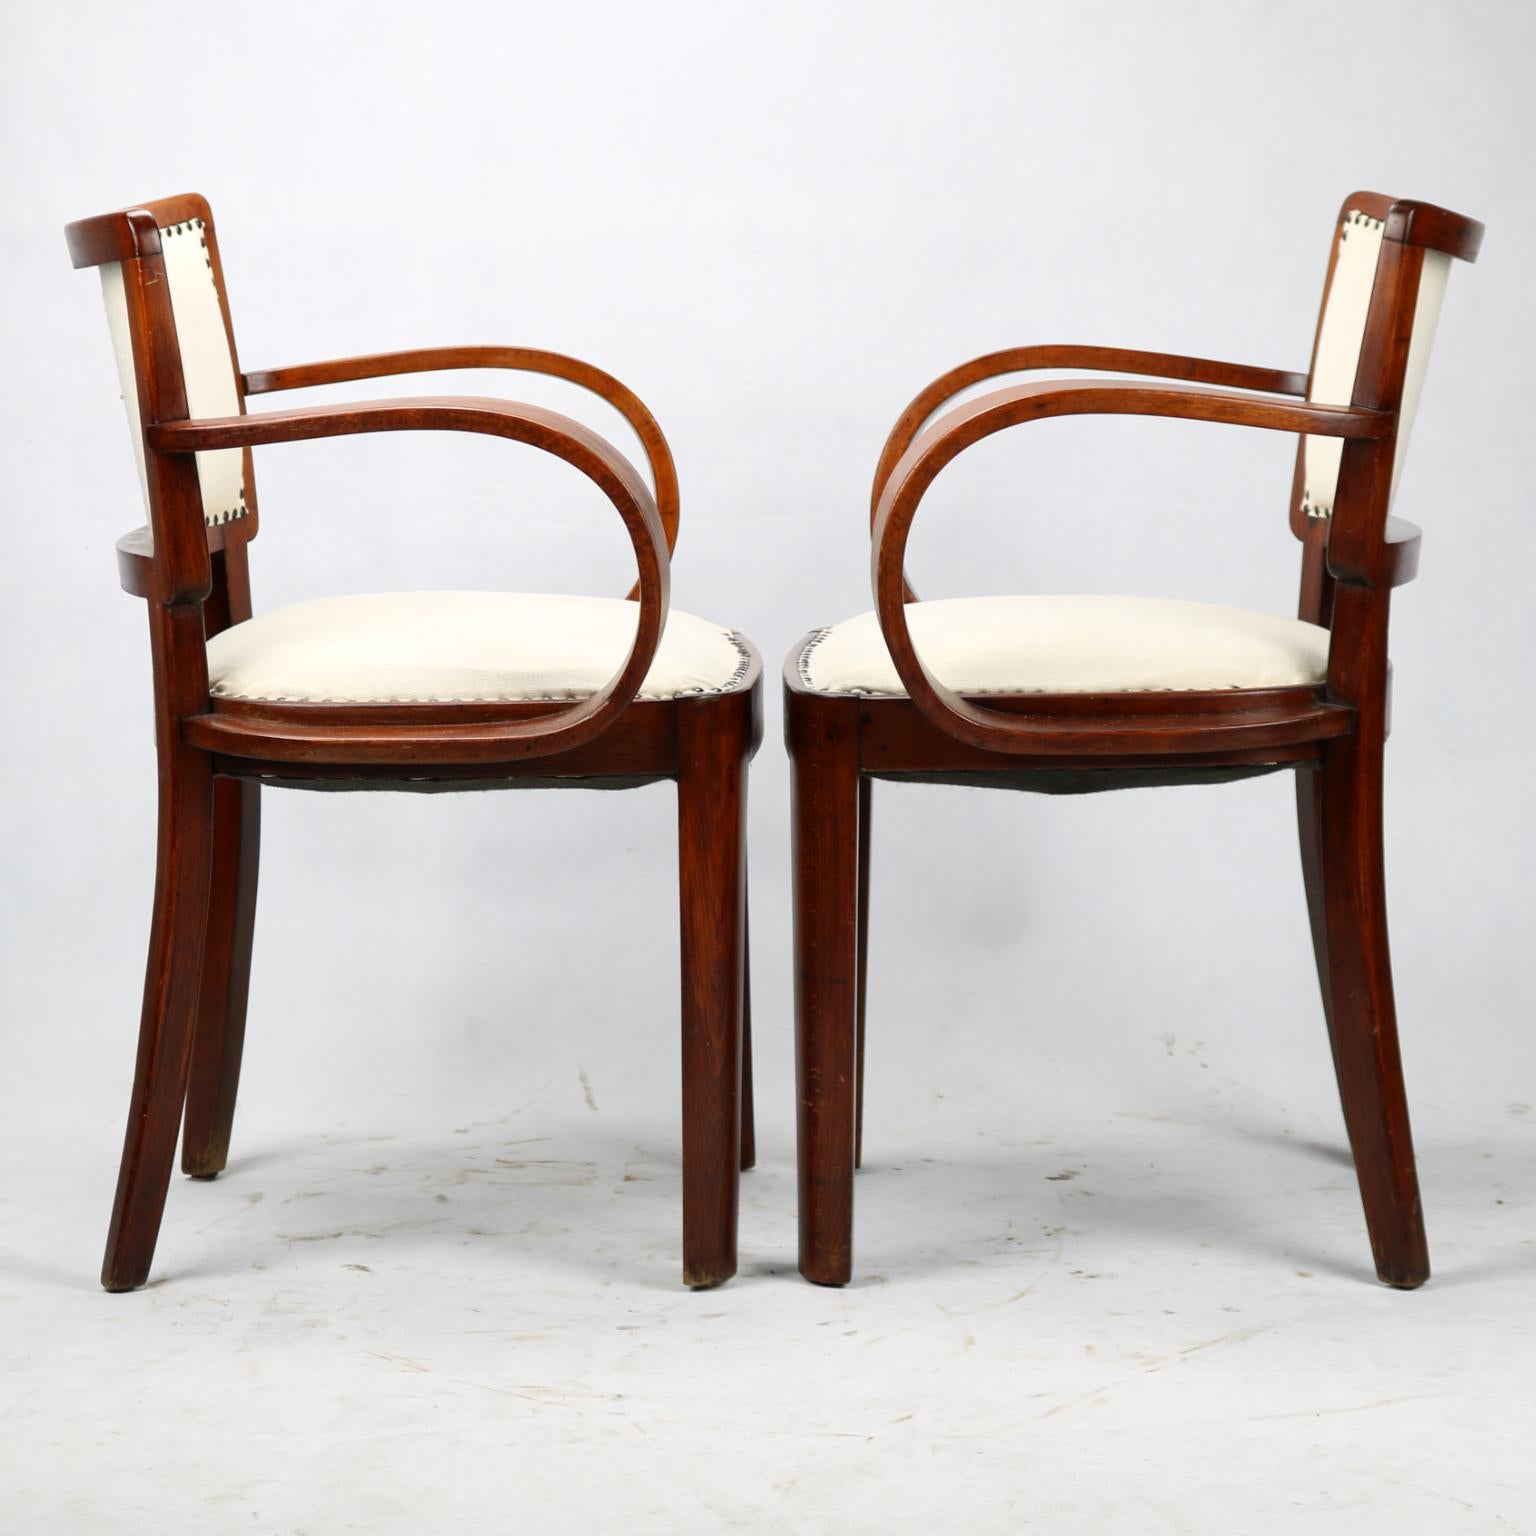 Art Deco armchairs, in very good condition.